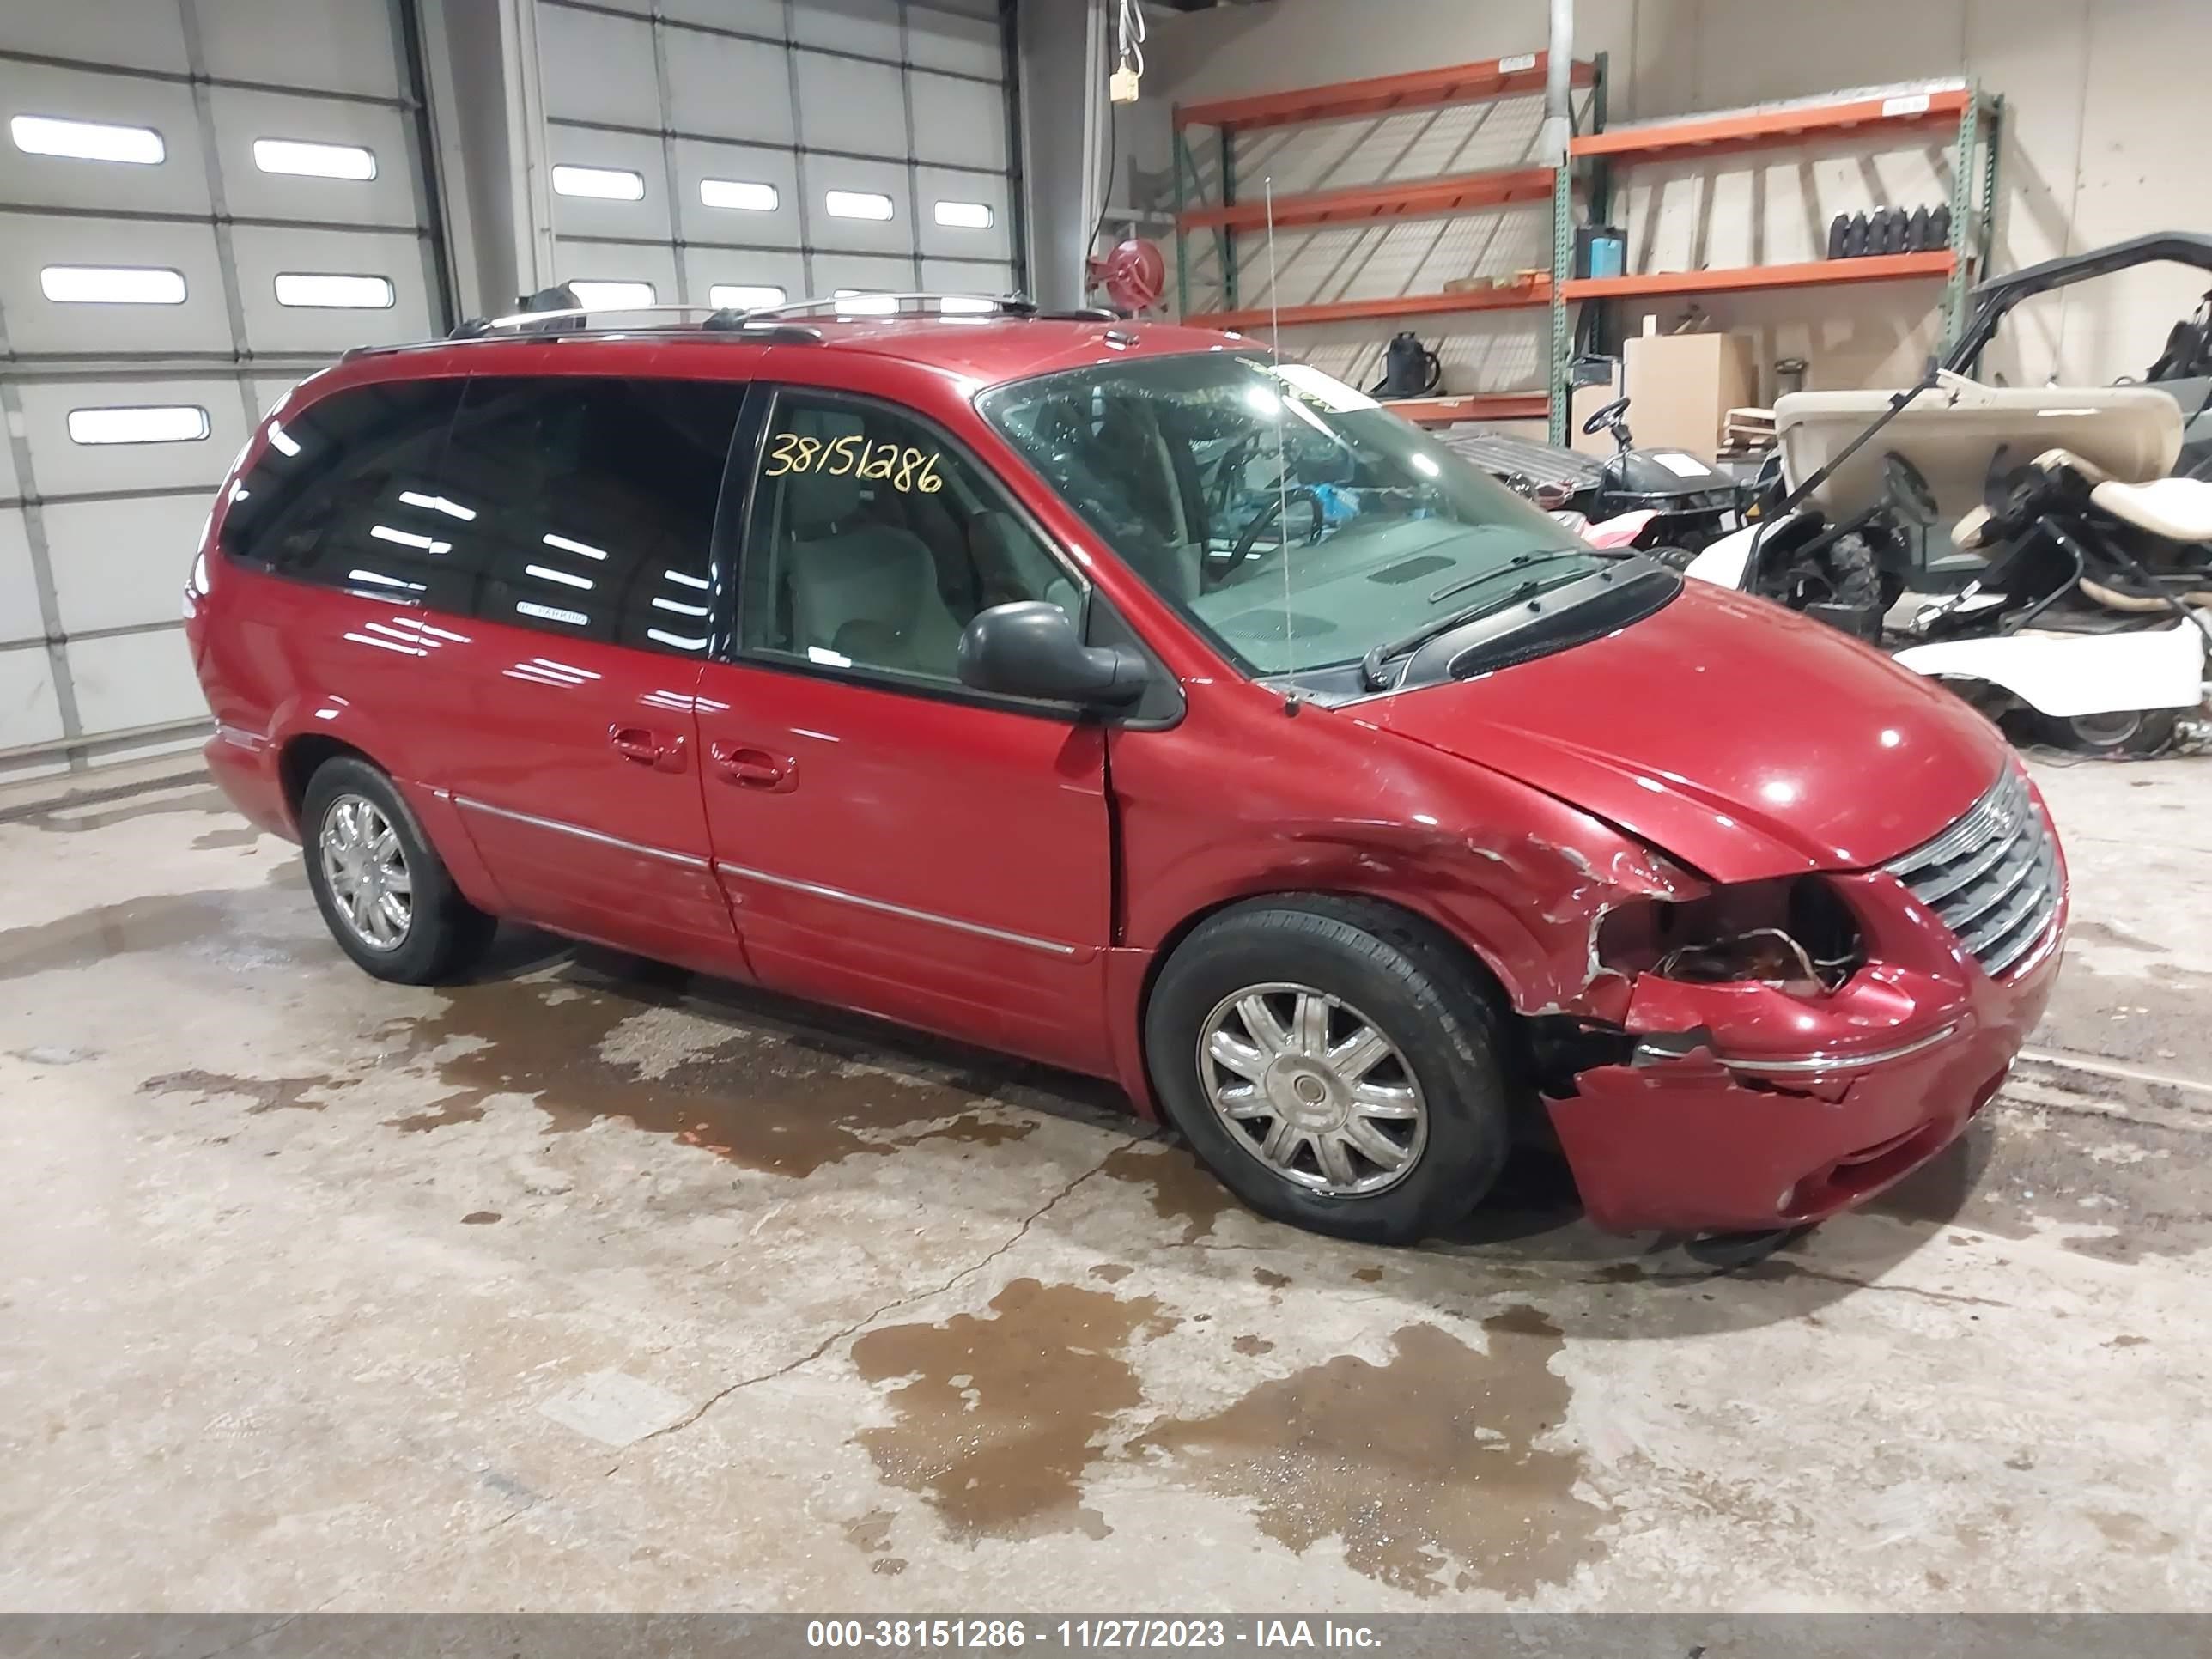 vin: 2A8GP64L06R836562 2A8GP64L06R836562 2006 chrysler town & country 3800 for Sale in 46806, 4300 Oxford St., Fort Wayne, USA